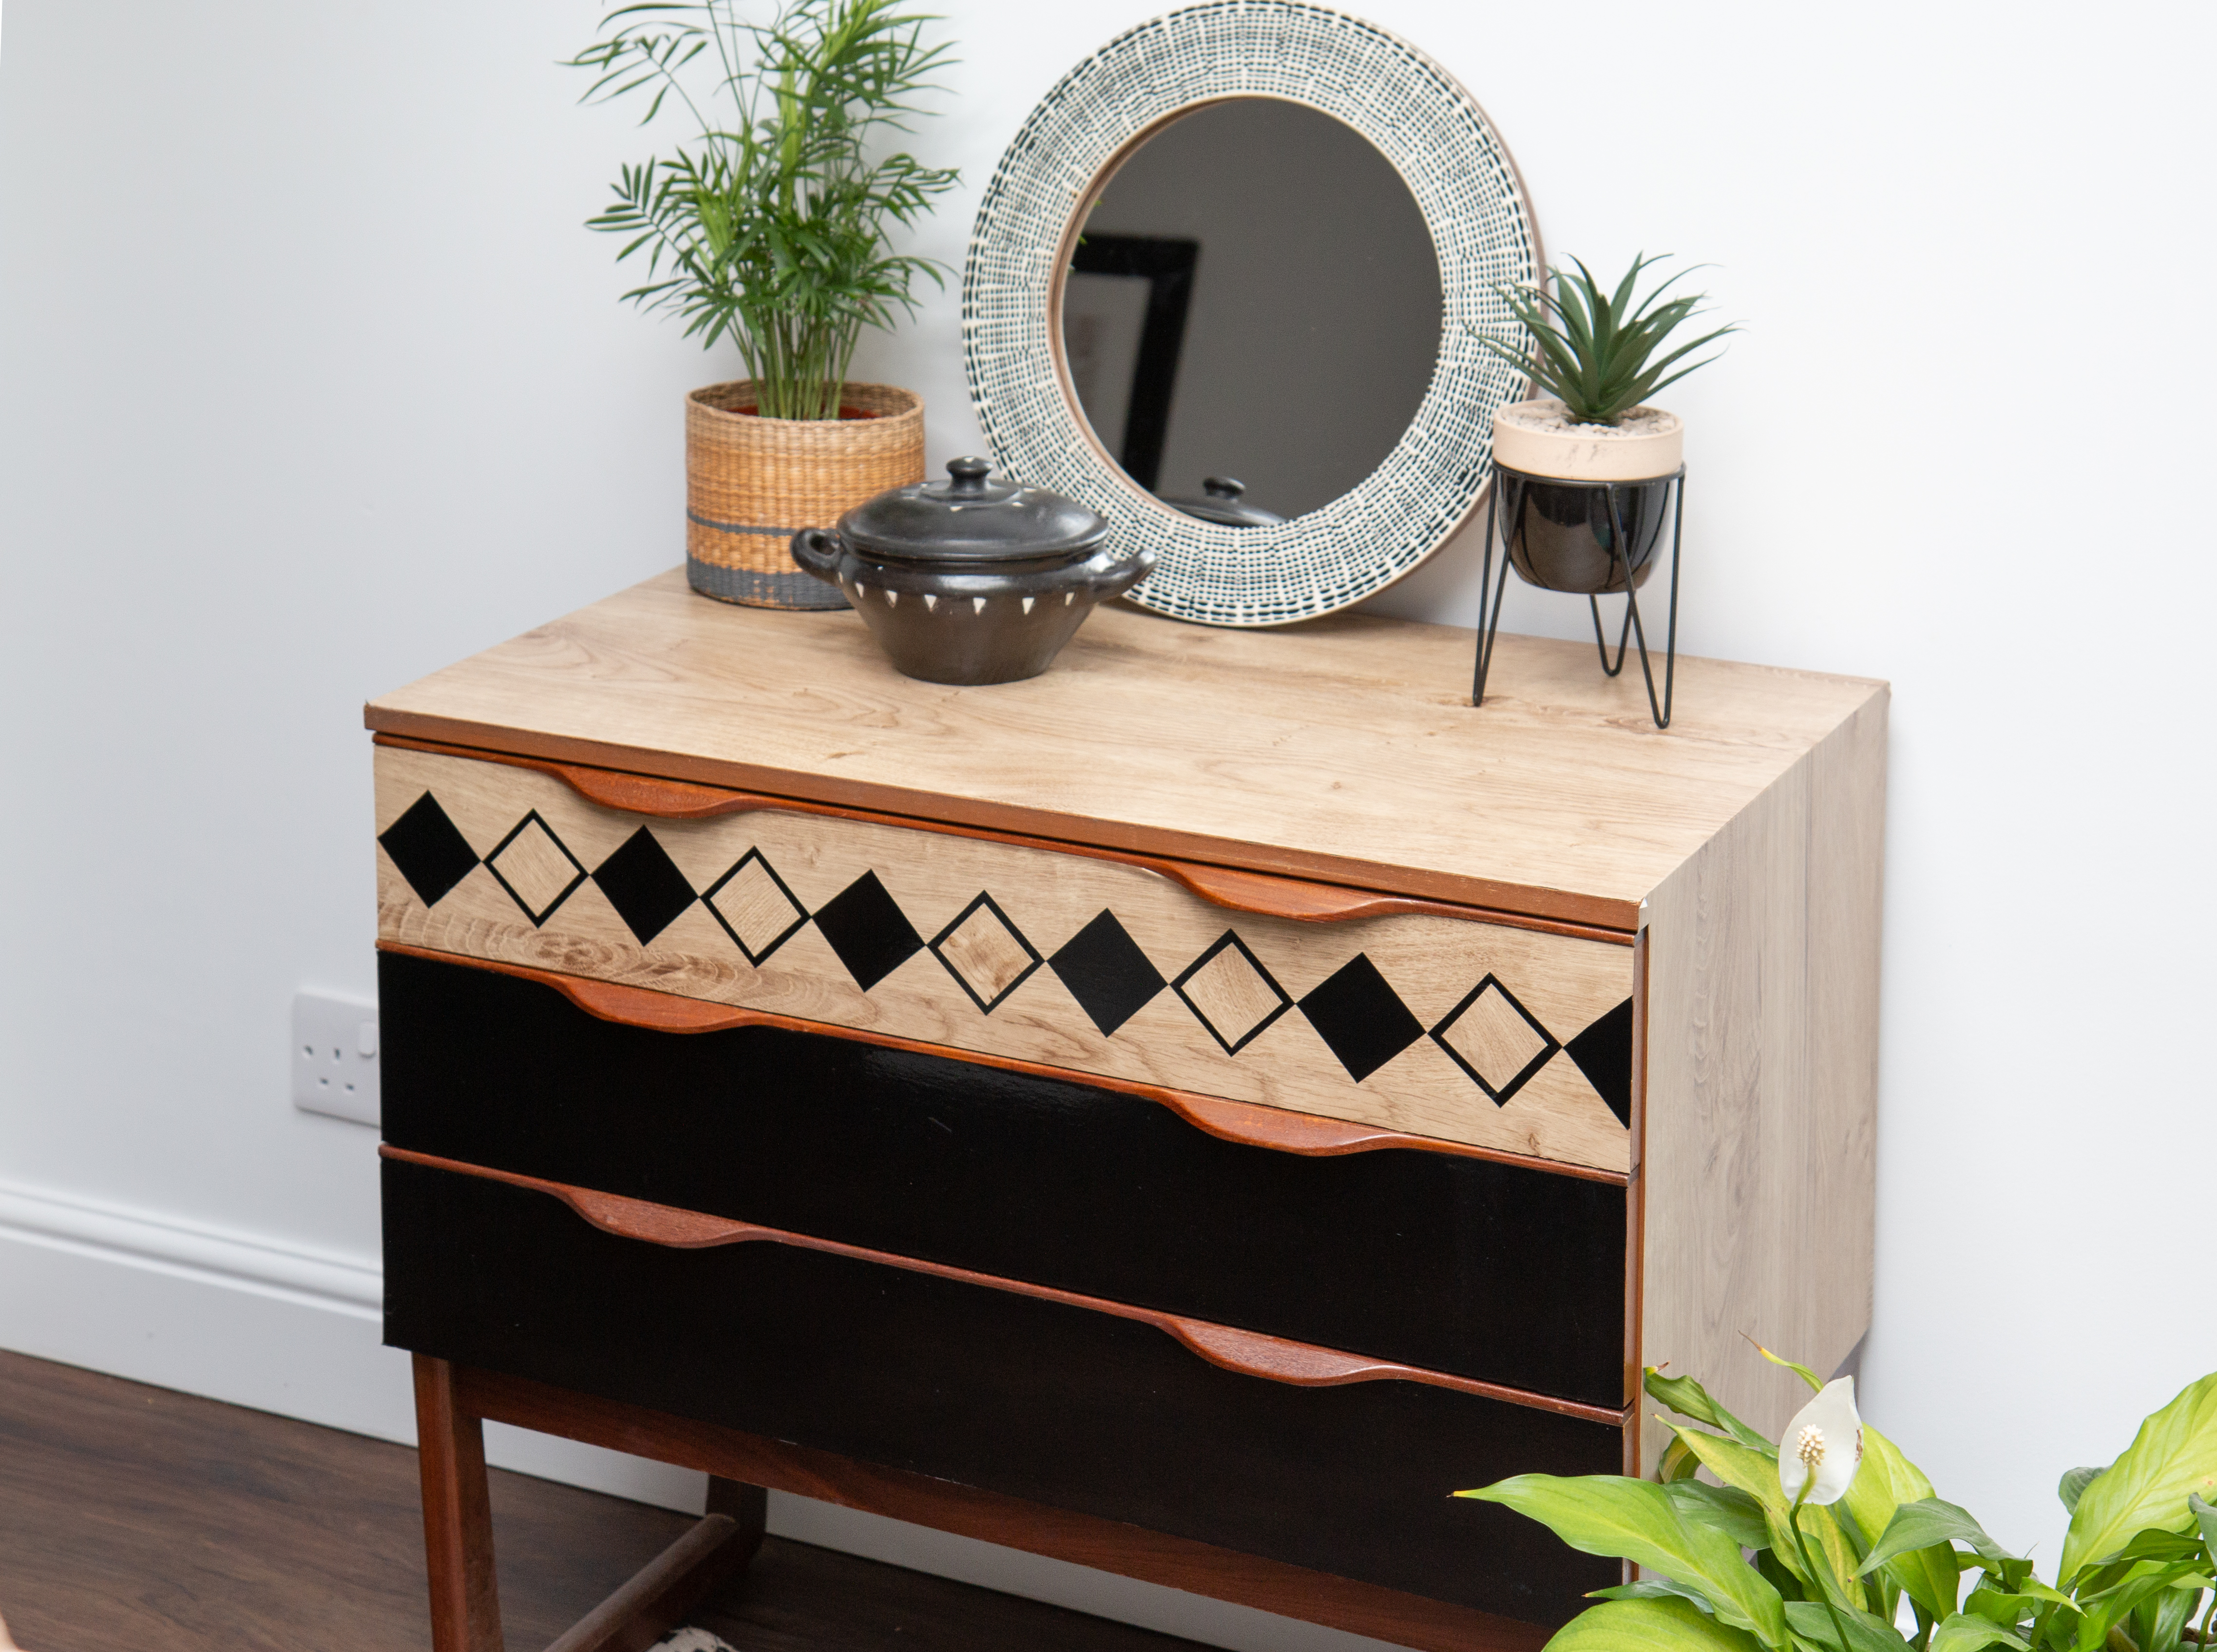 Chest of drawers covered with d-c-fix® adhesive films in a boho look with wood effect and decorative elements in black.